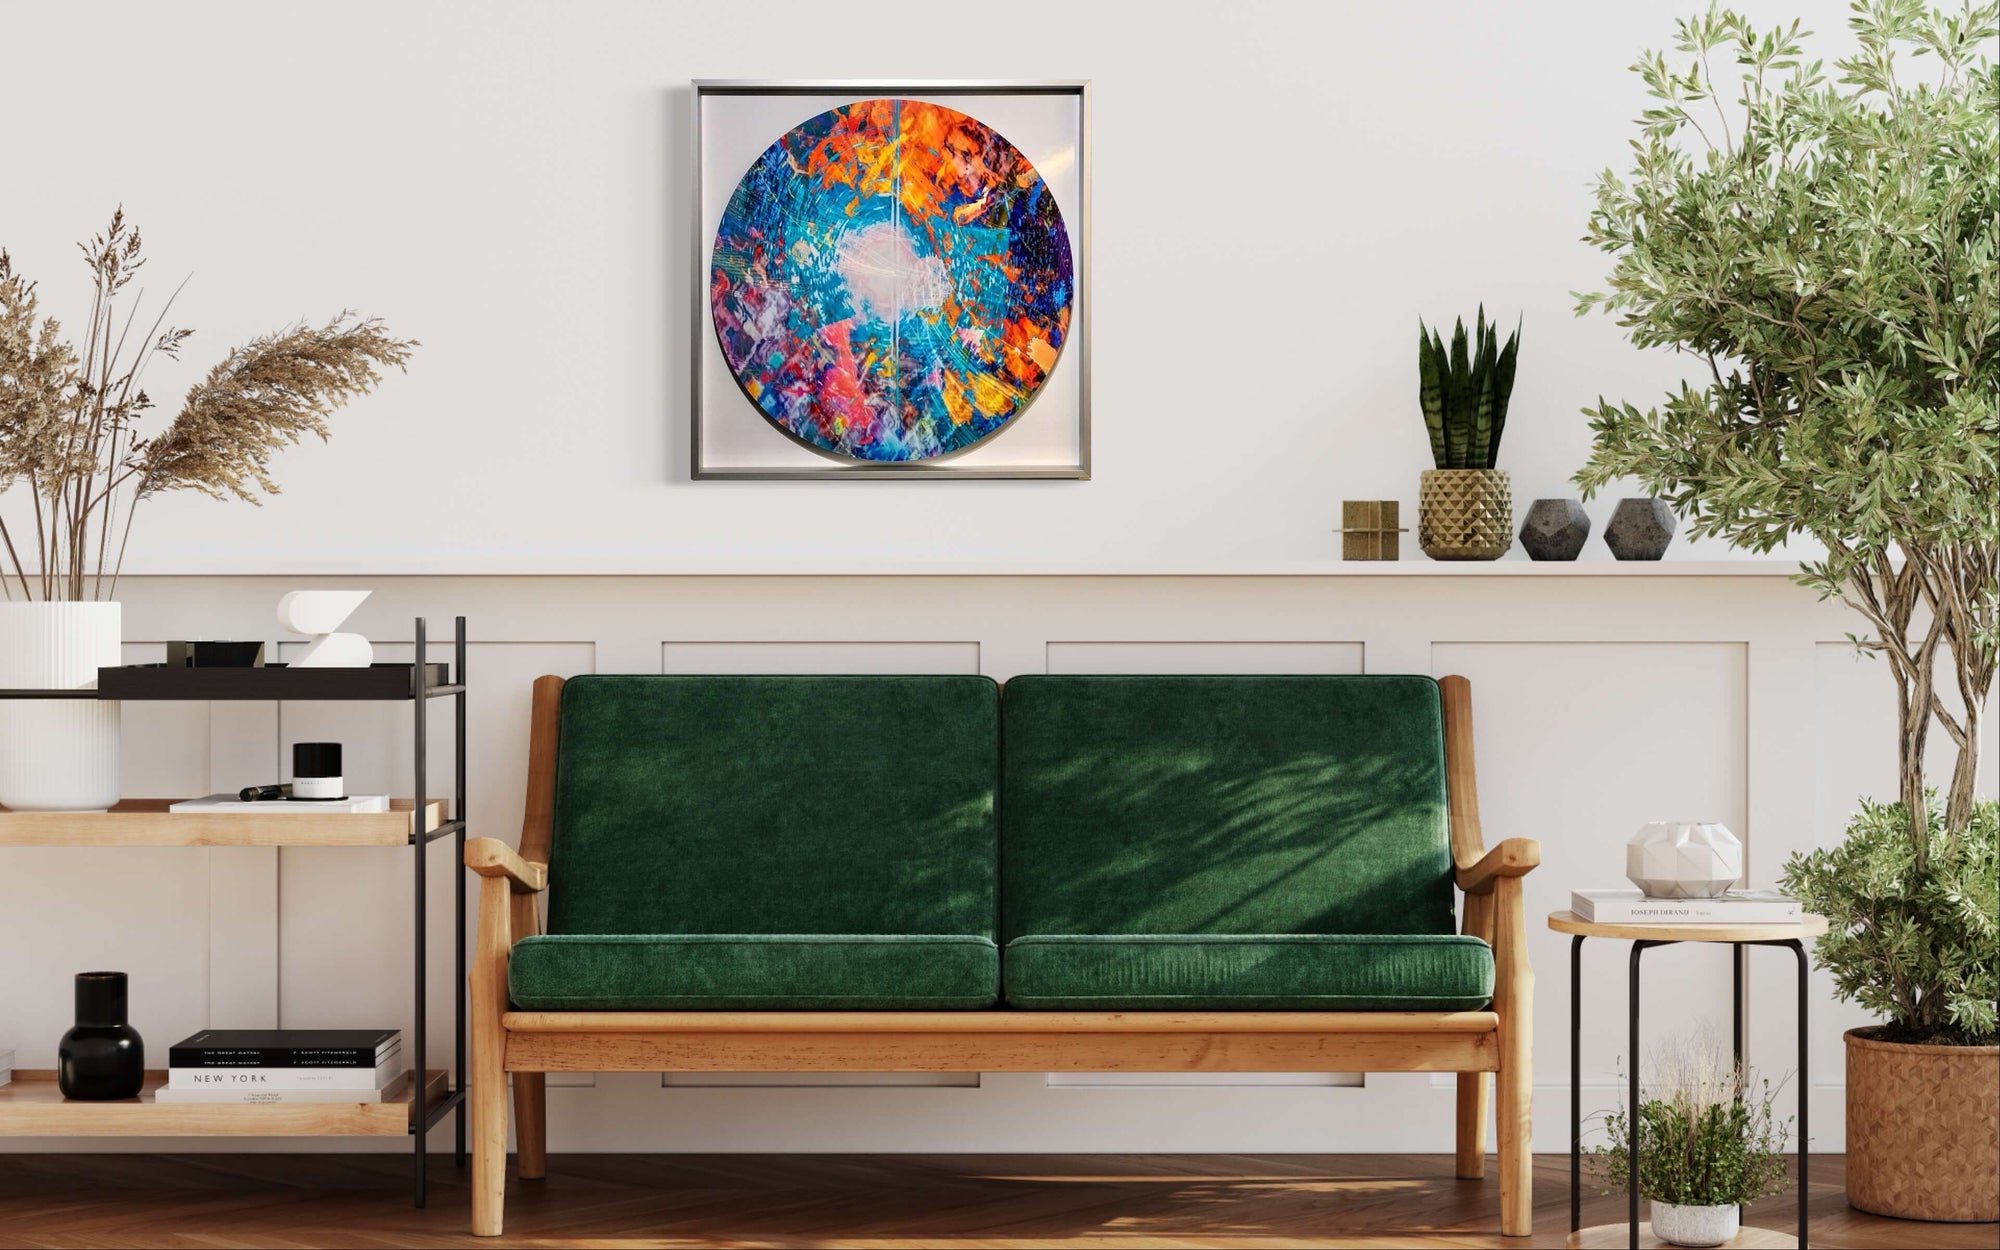 Abstract photographic artwork Serenity displayed in a contemporary space. Colorful circular patterns created through digital and analog techniques hold individual meaning and convey a mood of calmness and comfort. #CameraAsBrush